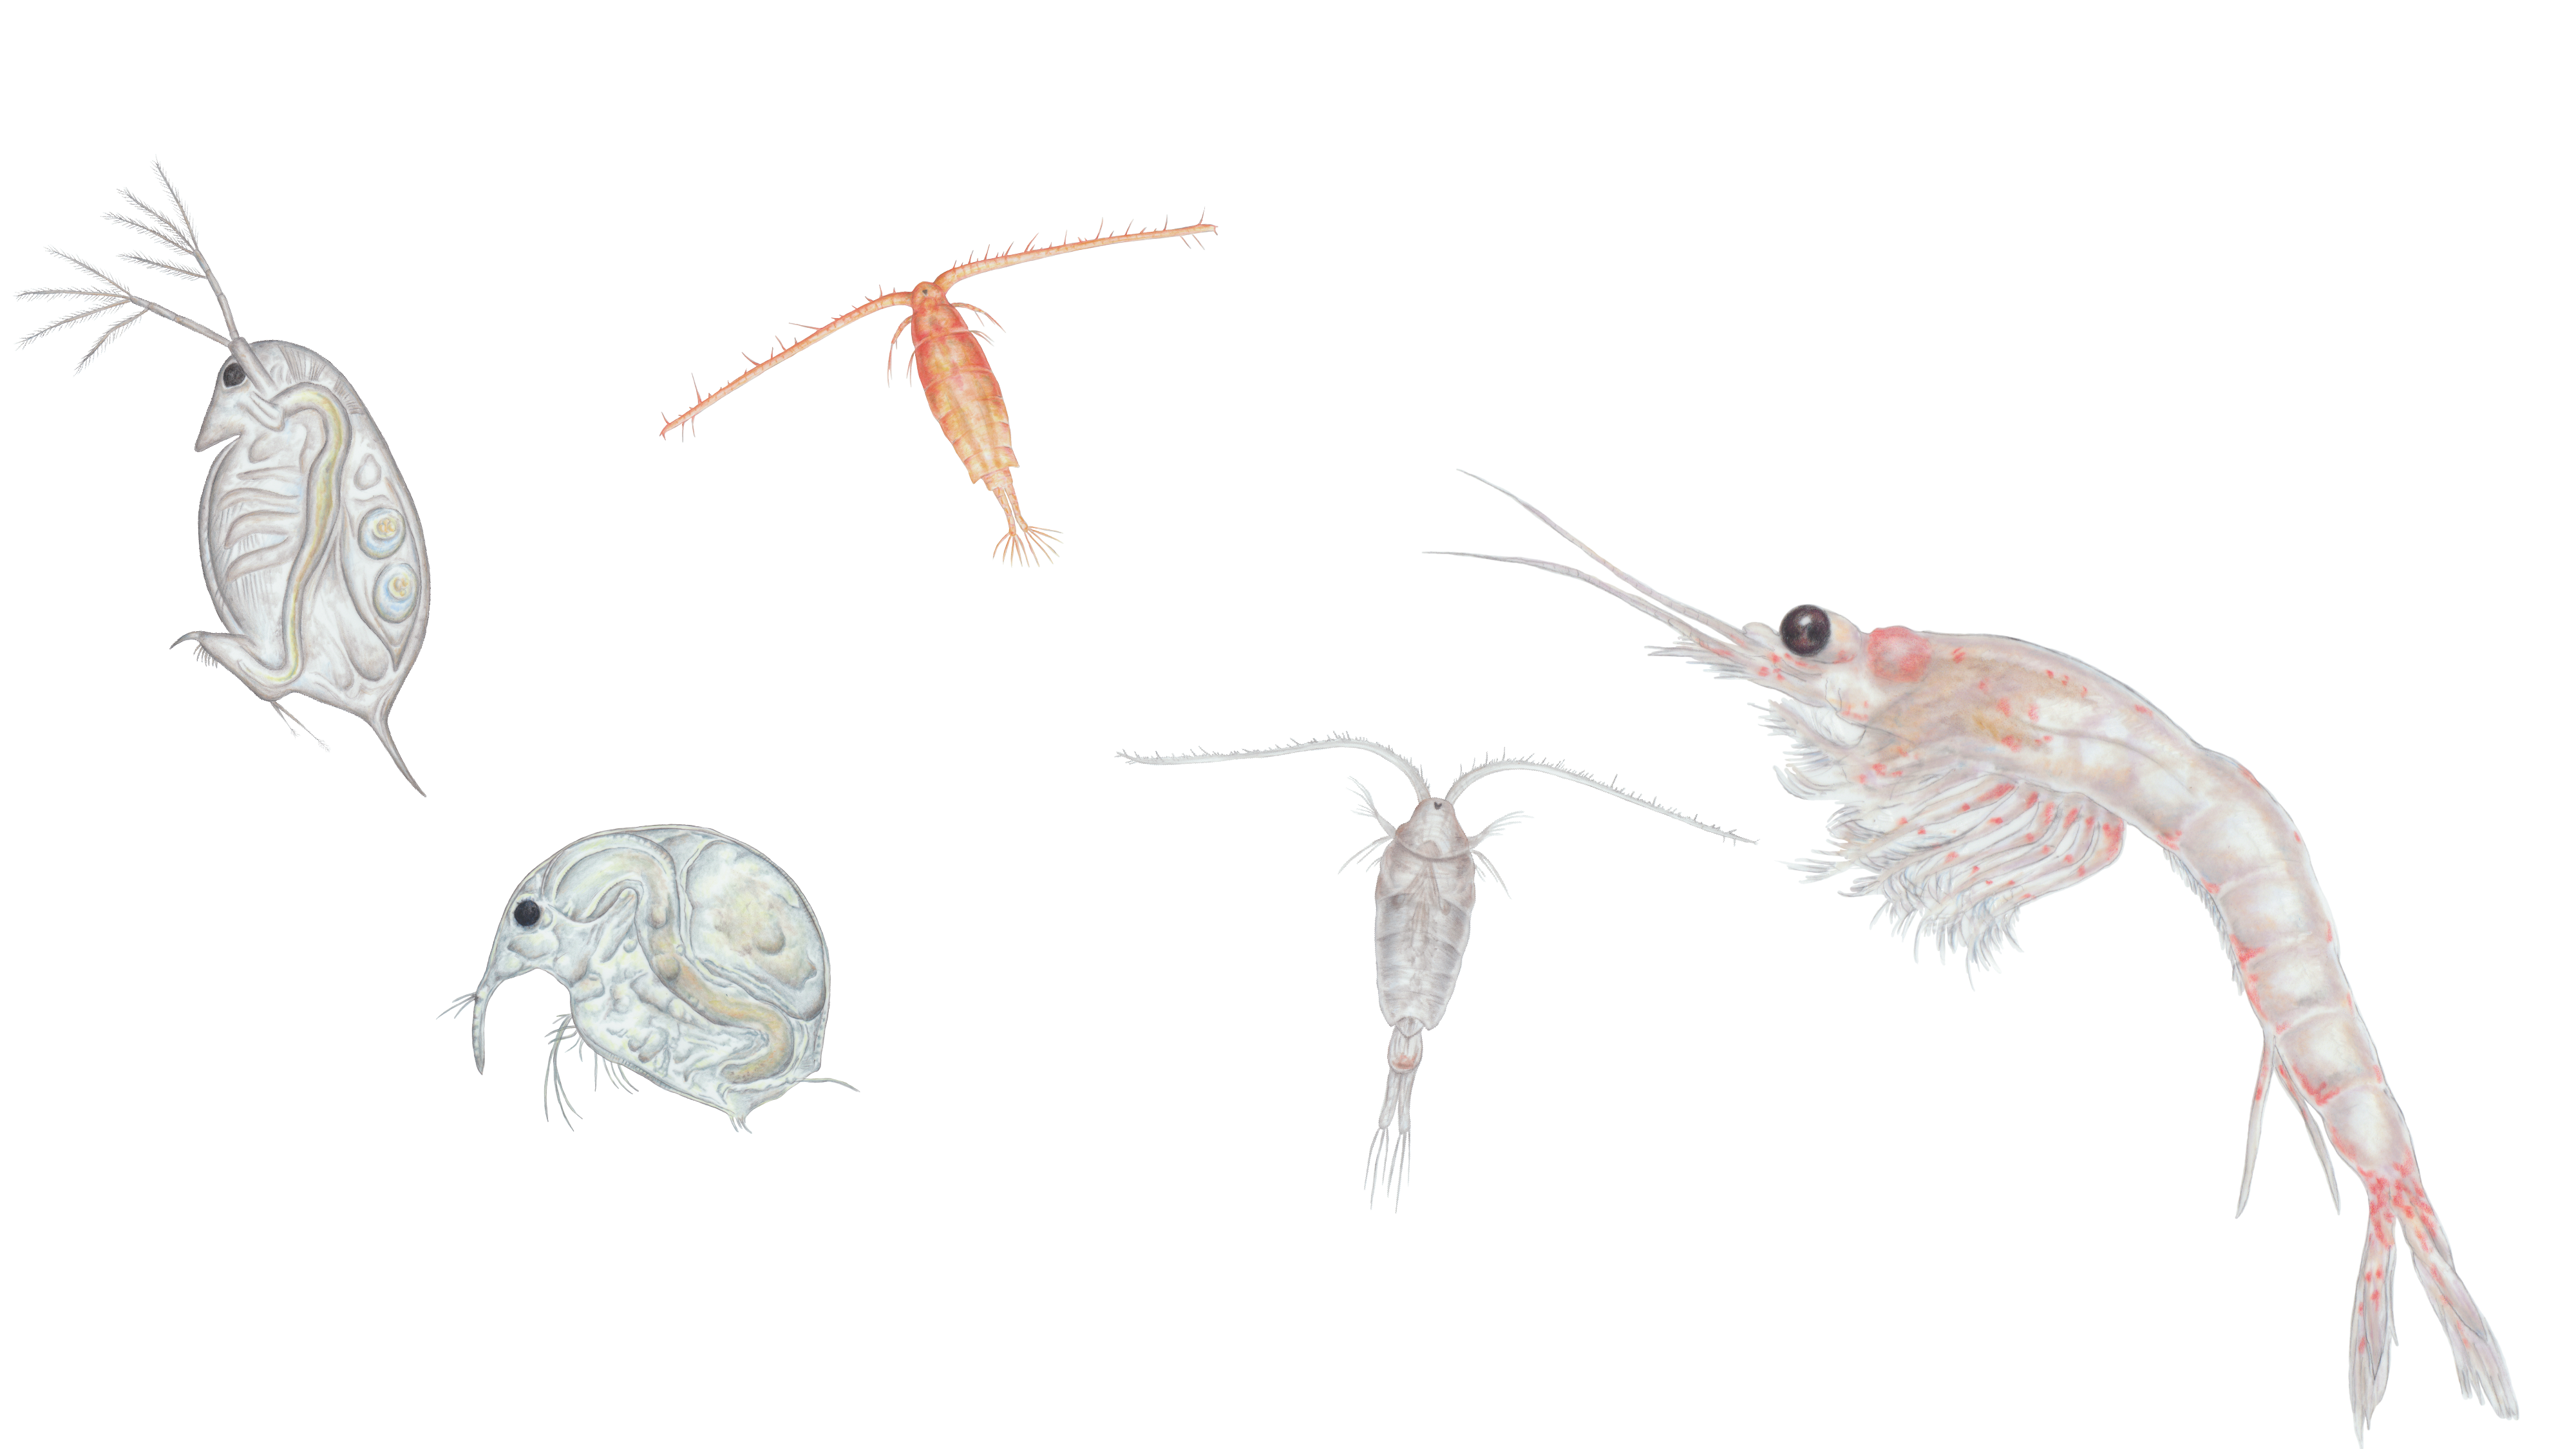 Several types of zooplankton, which sort of look like little shrimp